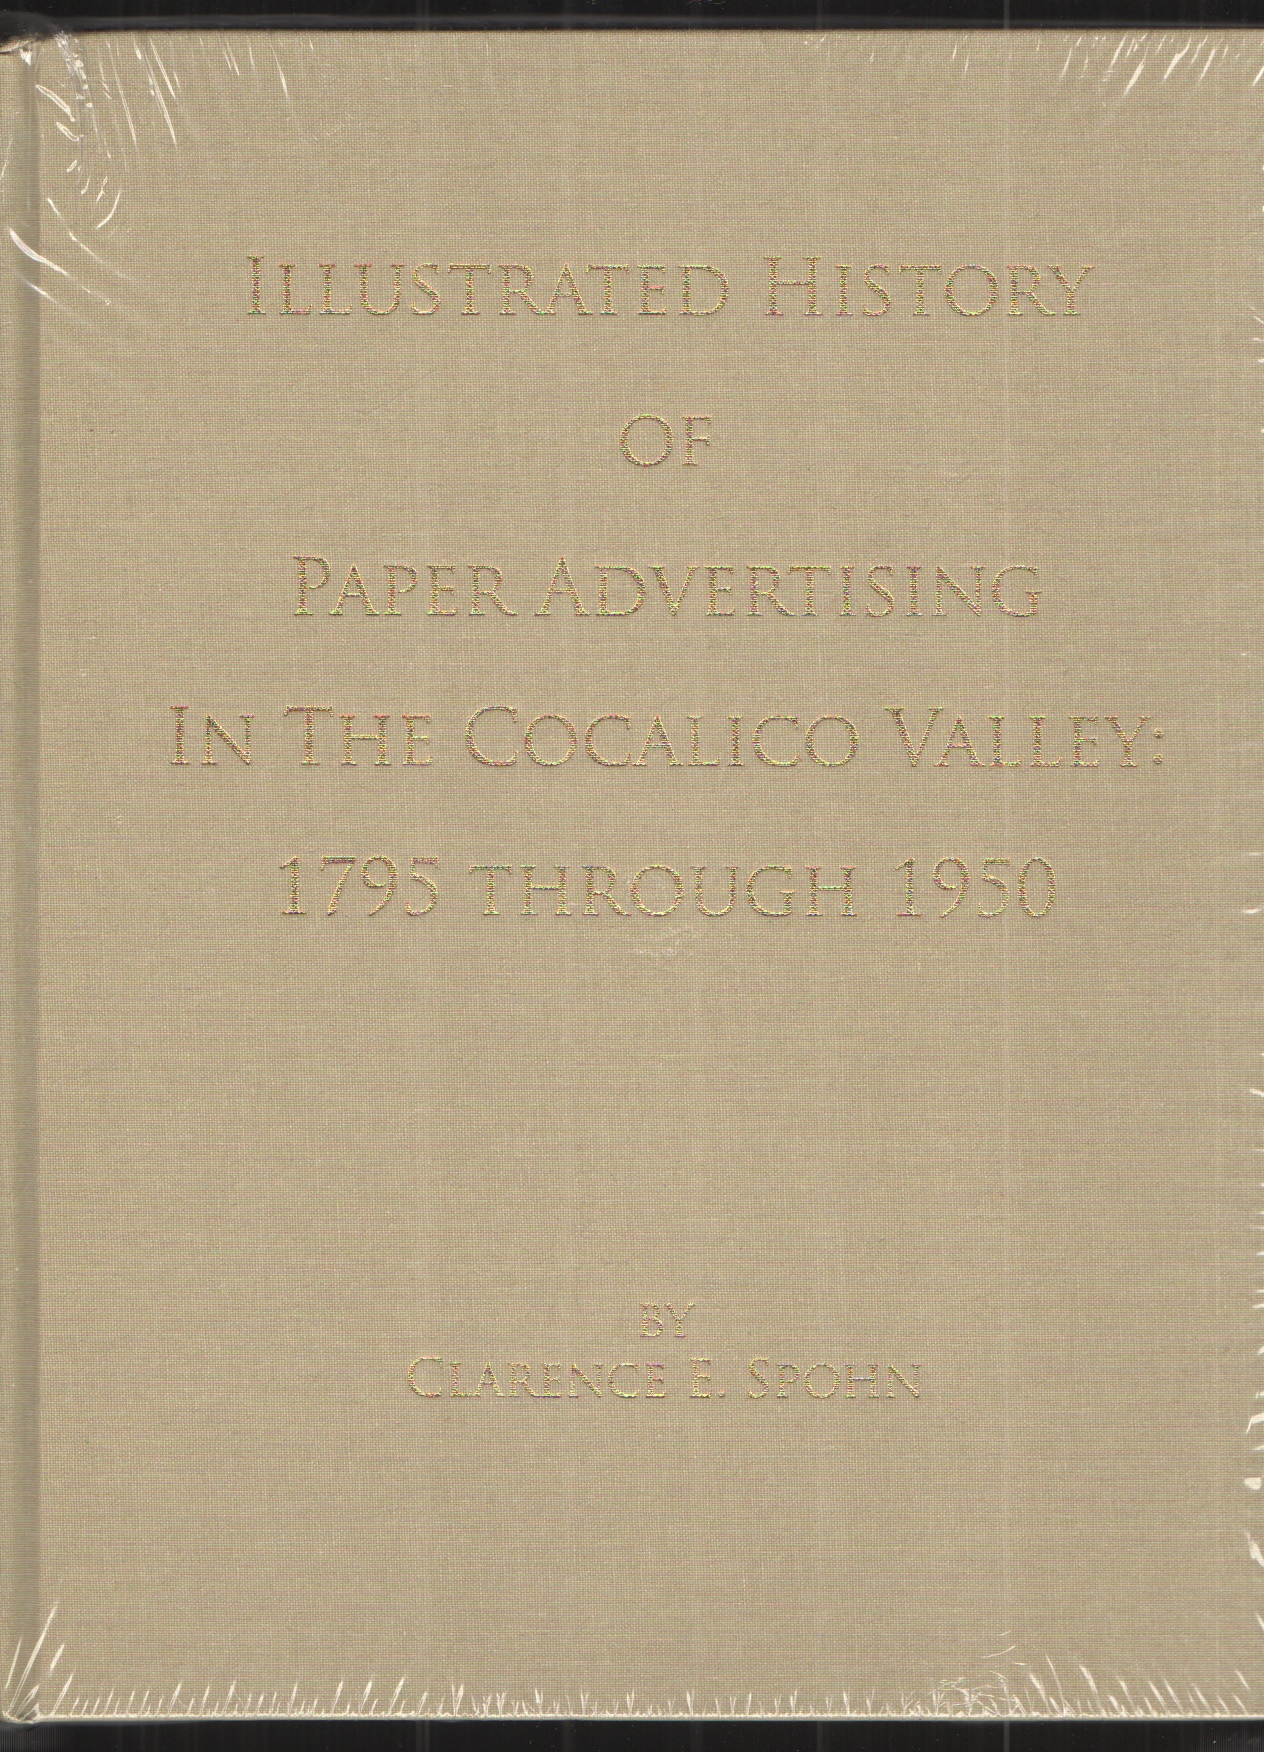 Image for Illustrated History of Paper Advertising in the Cocalico Valley: 1795 through 1950